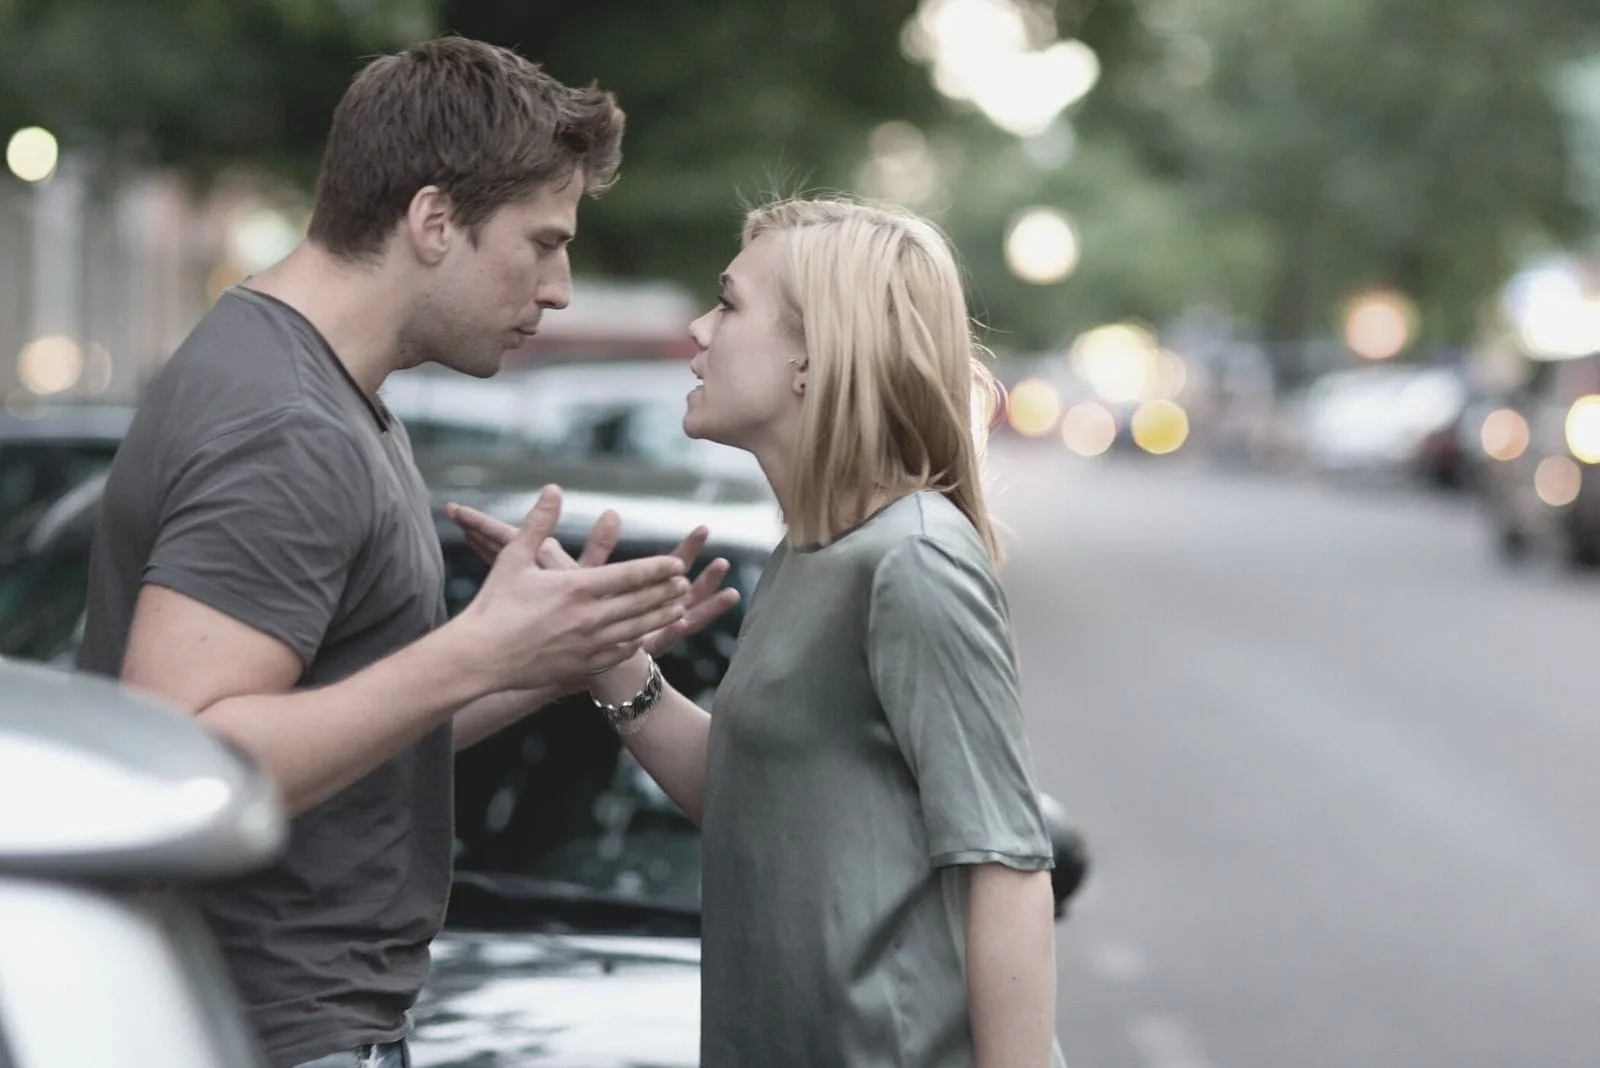 couple arguing outdoors standing near the cars parked near the street